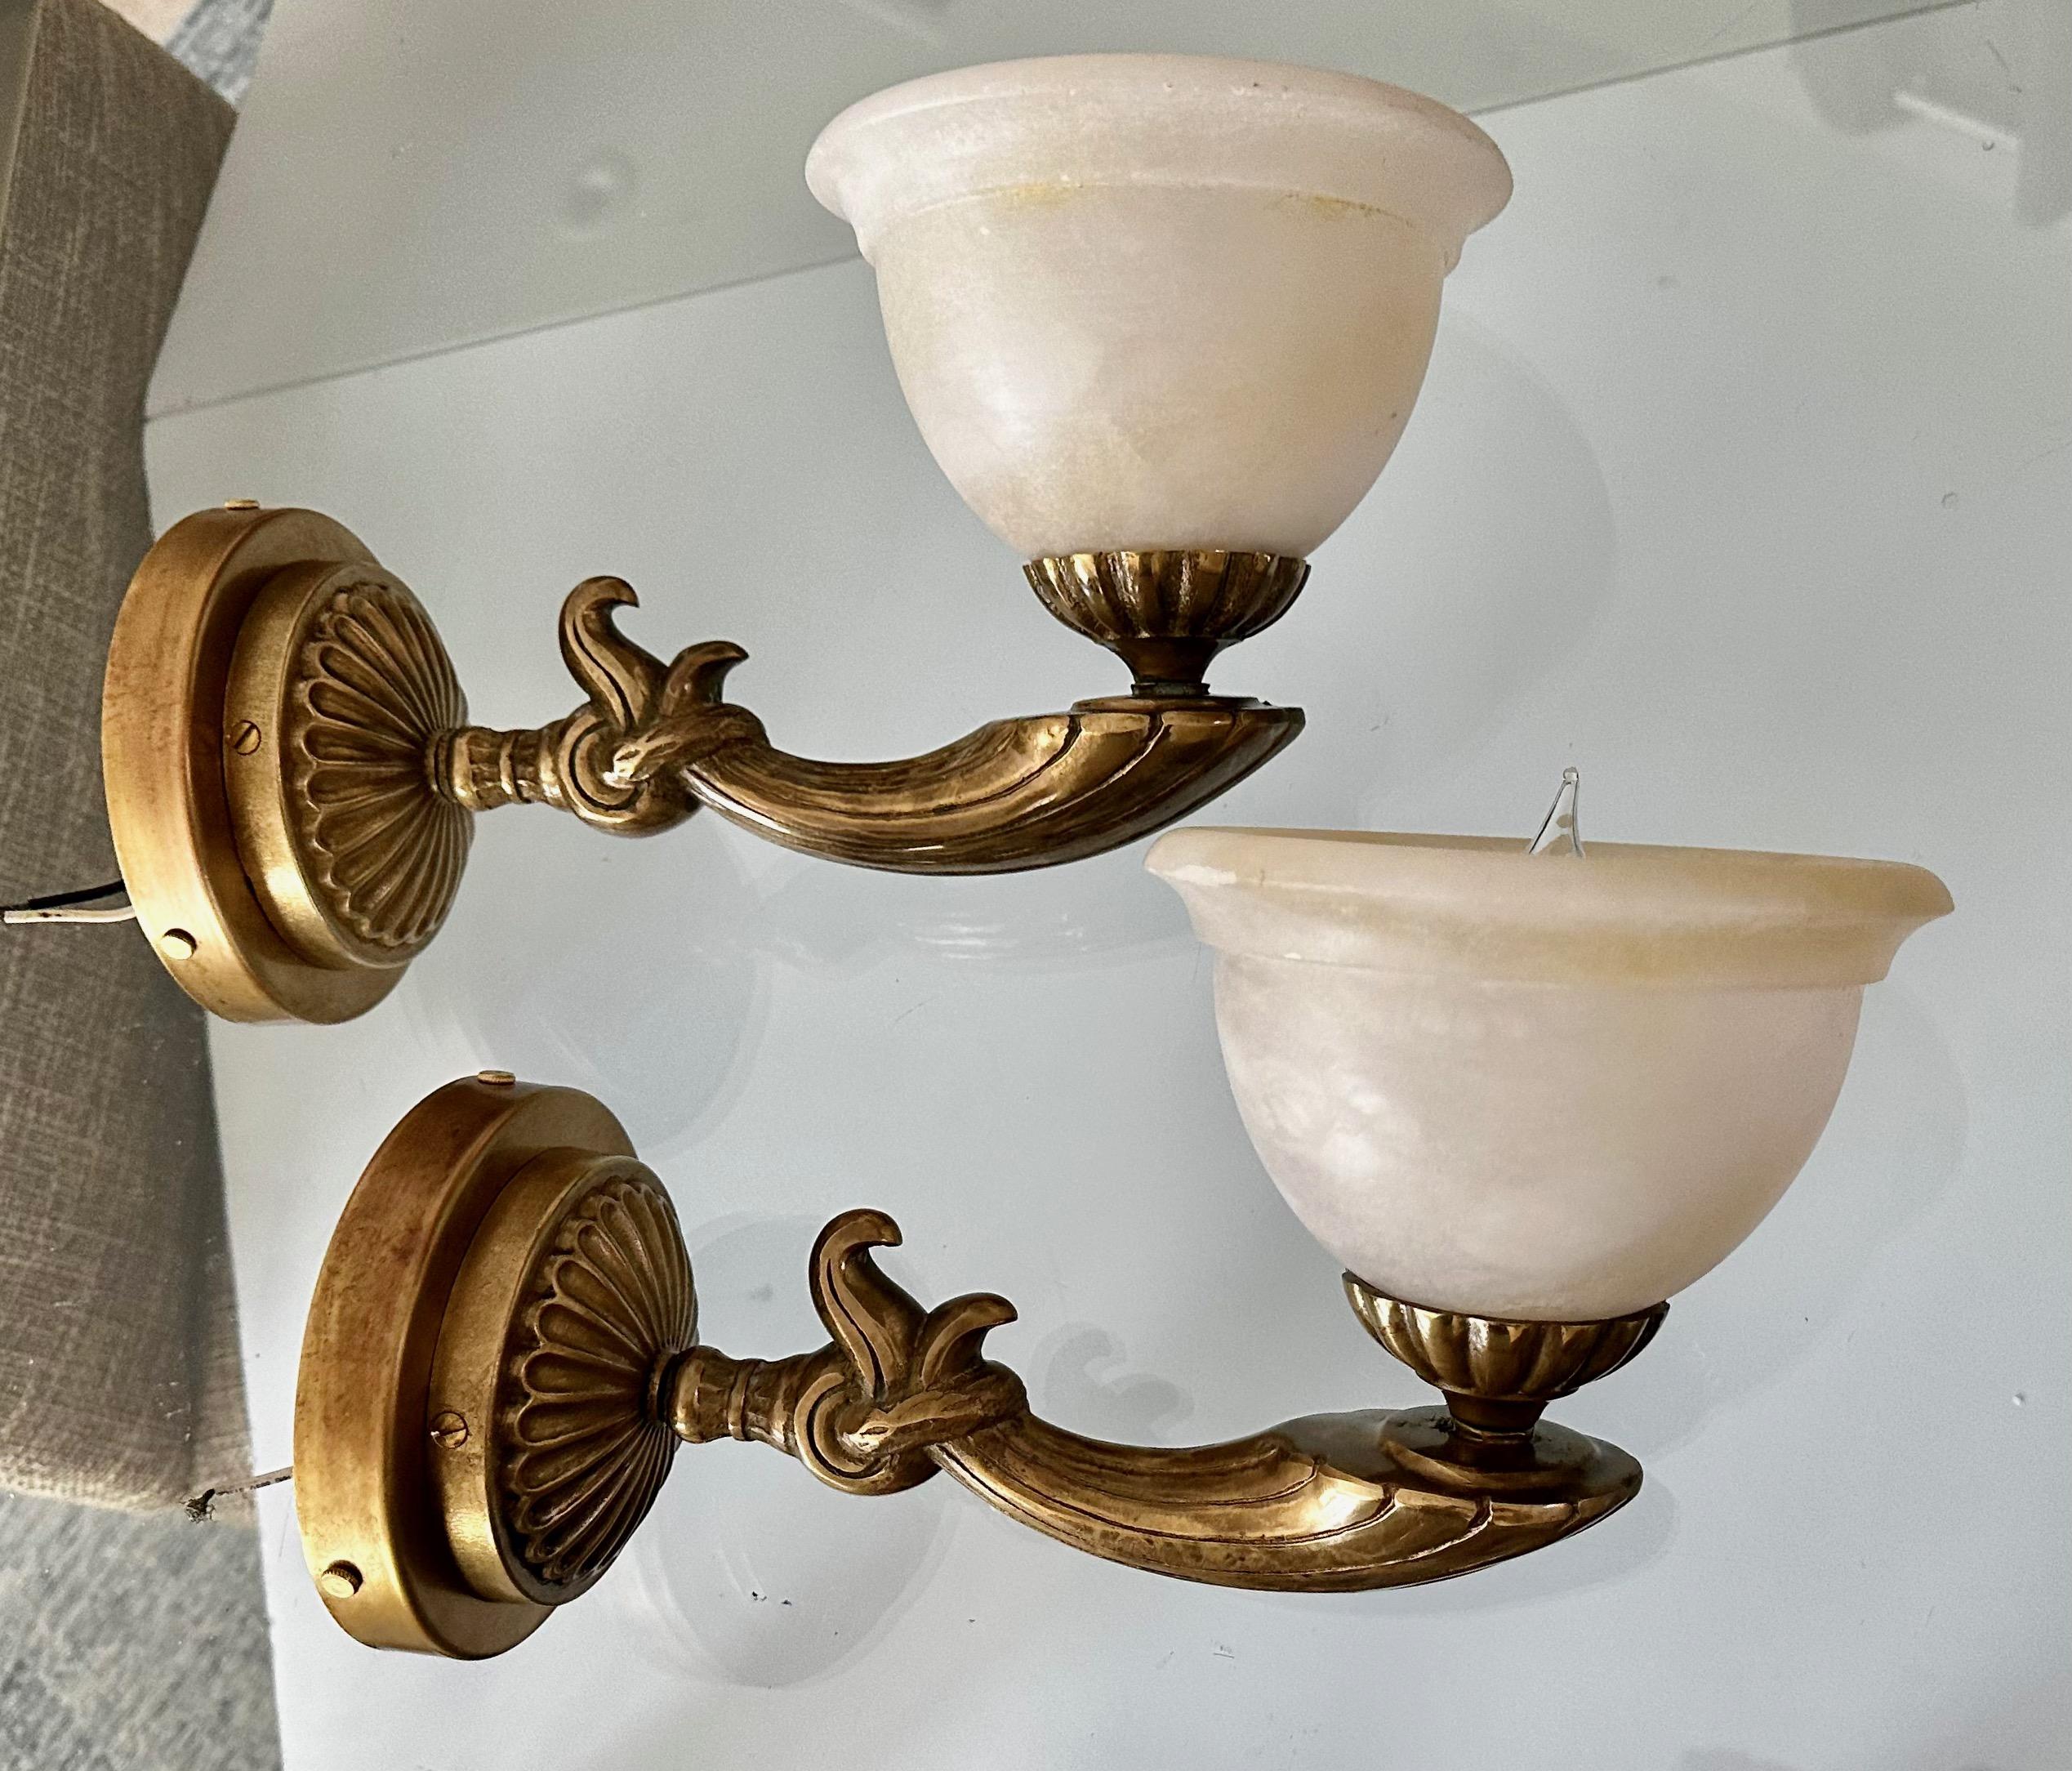 Pair brass French style wall sconces with alabaster globe shades. Each uses single regular A base bulb. Diameter of alabaster bowl 8